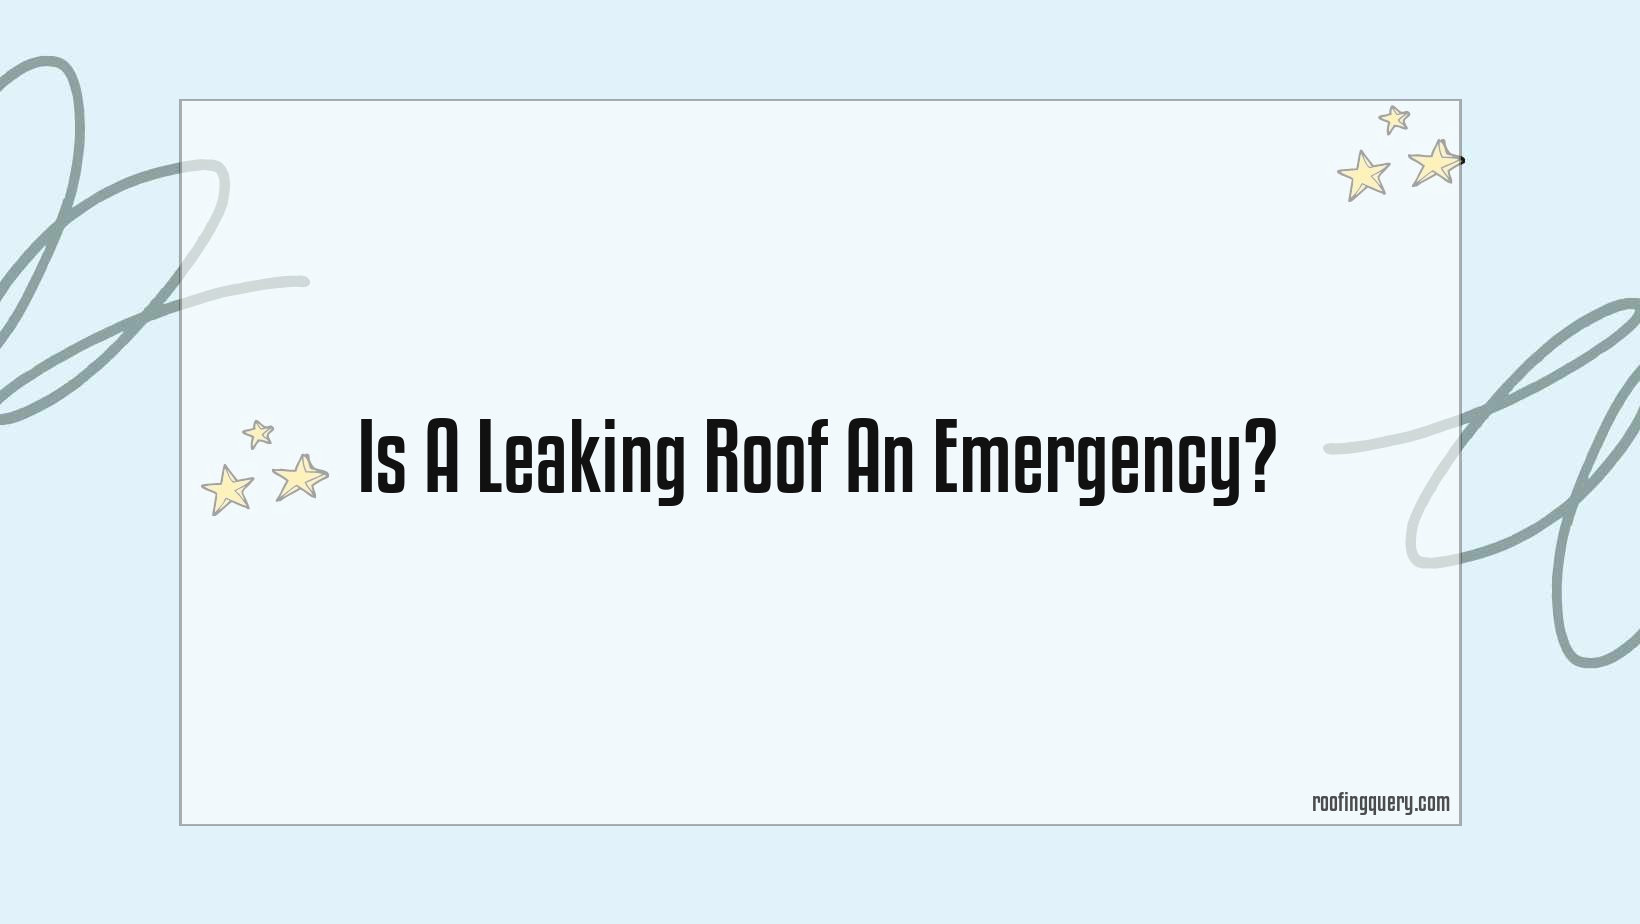 Is A Leaking Roof An Emergency?